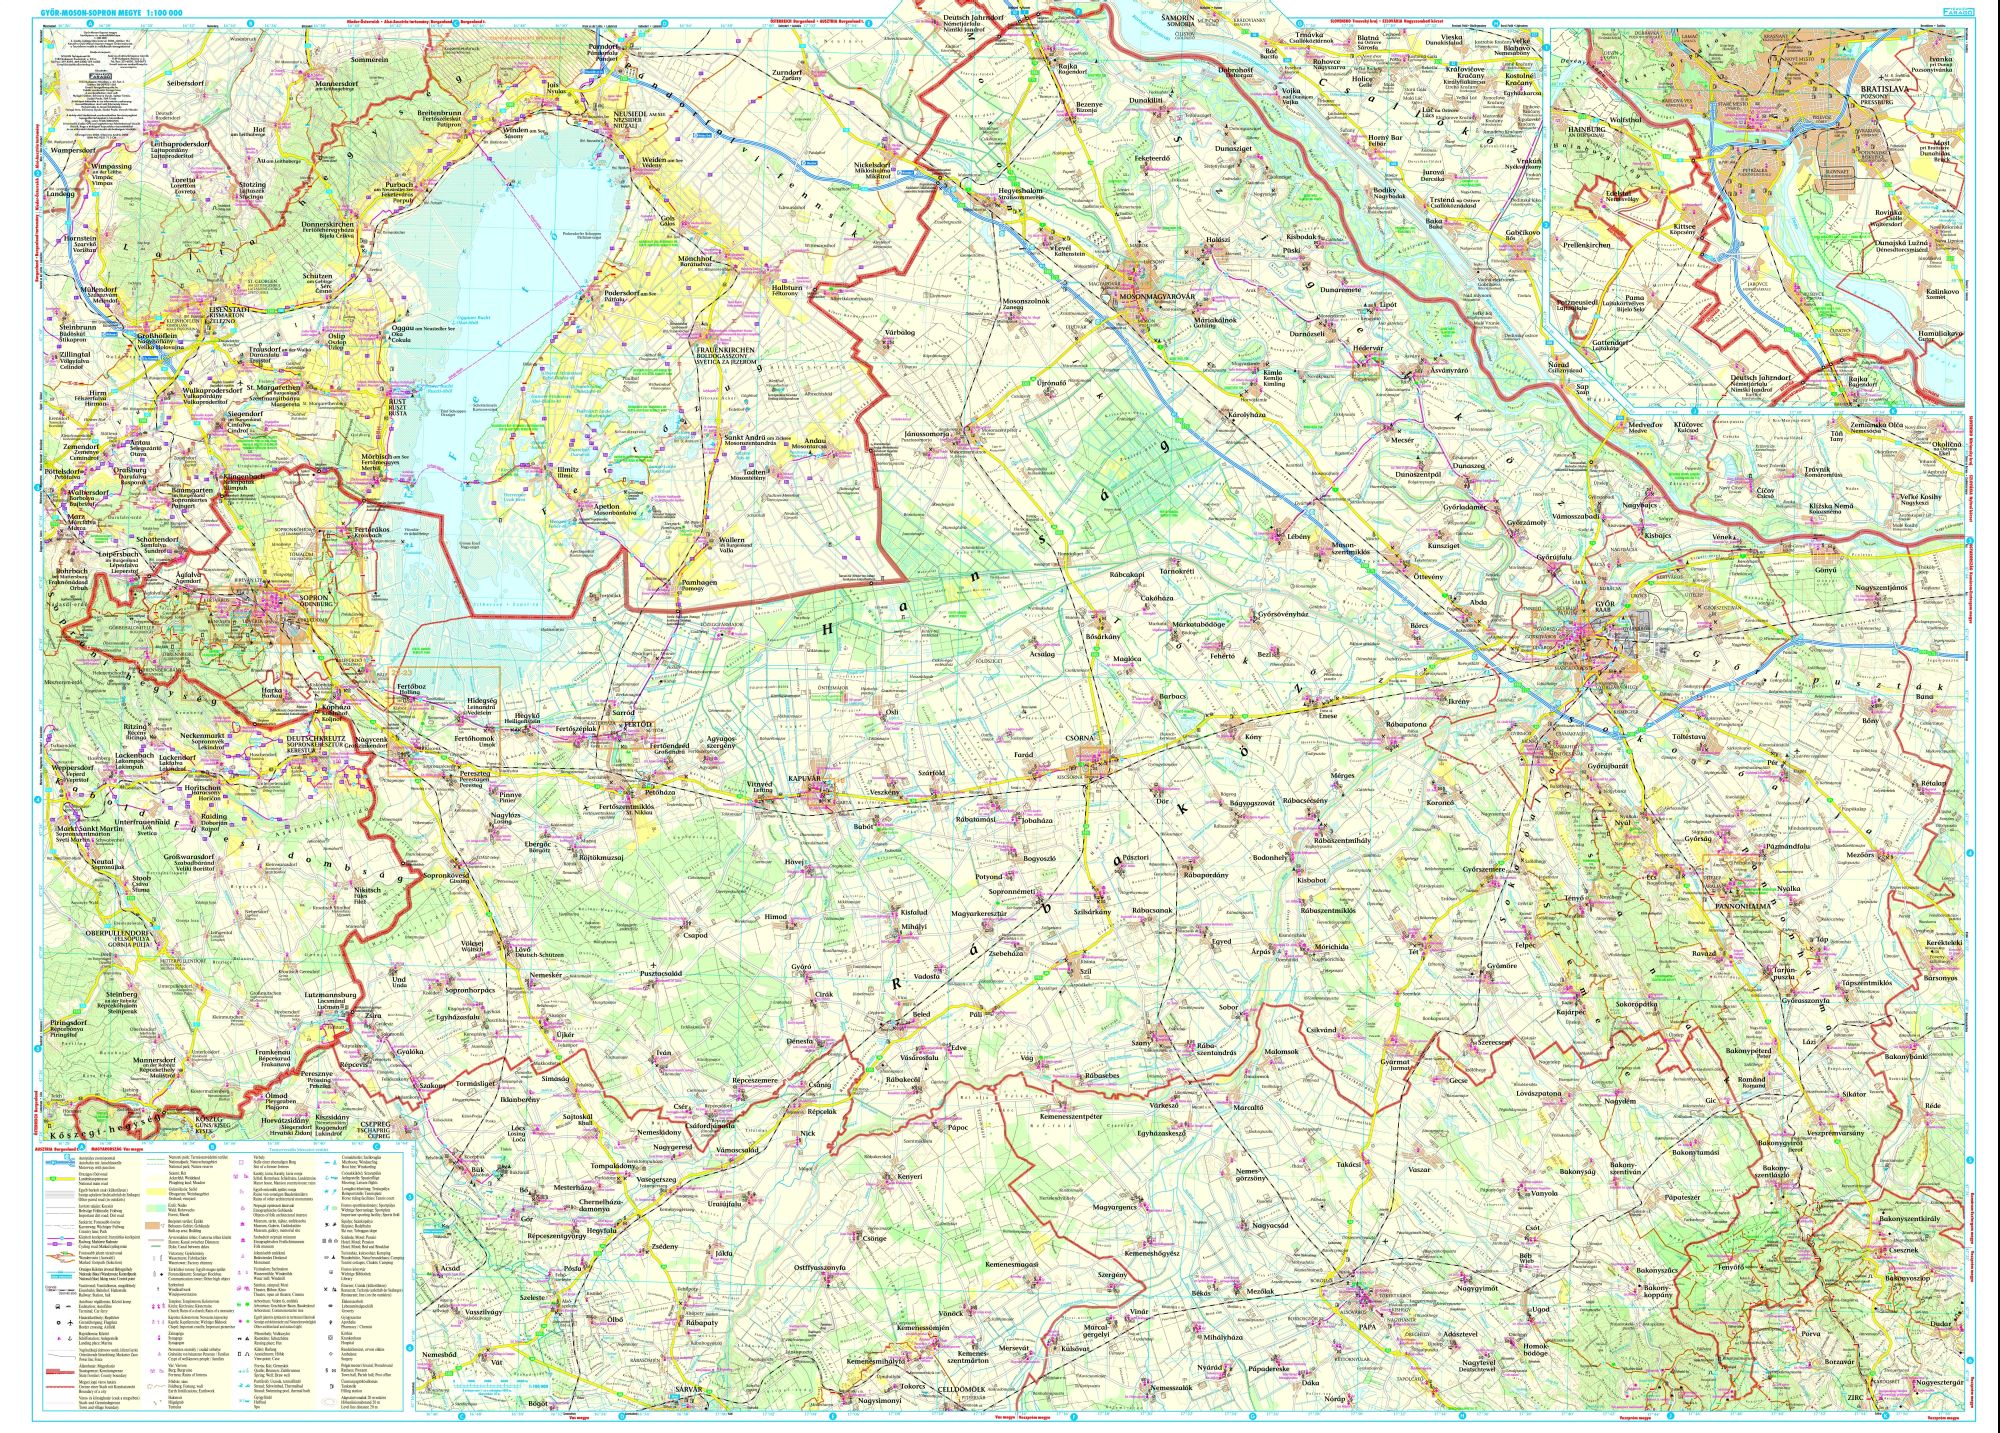 Győr-Moson-Sopron county: area covered by the main map 1:100.000